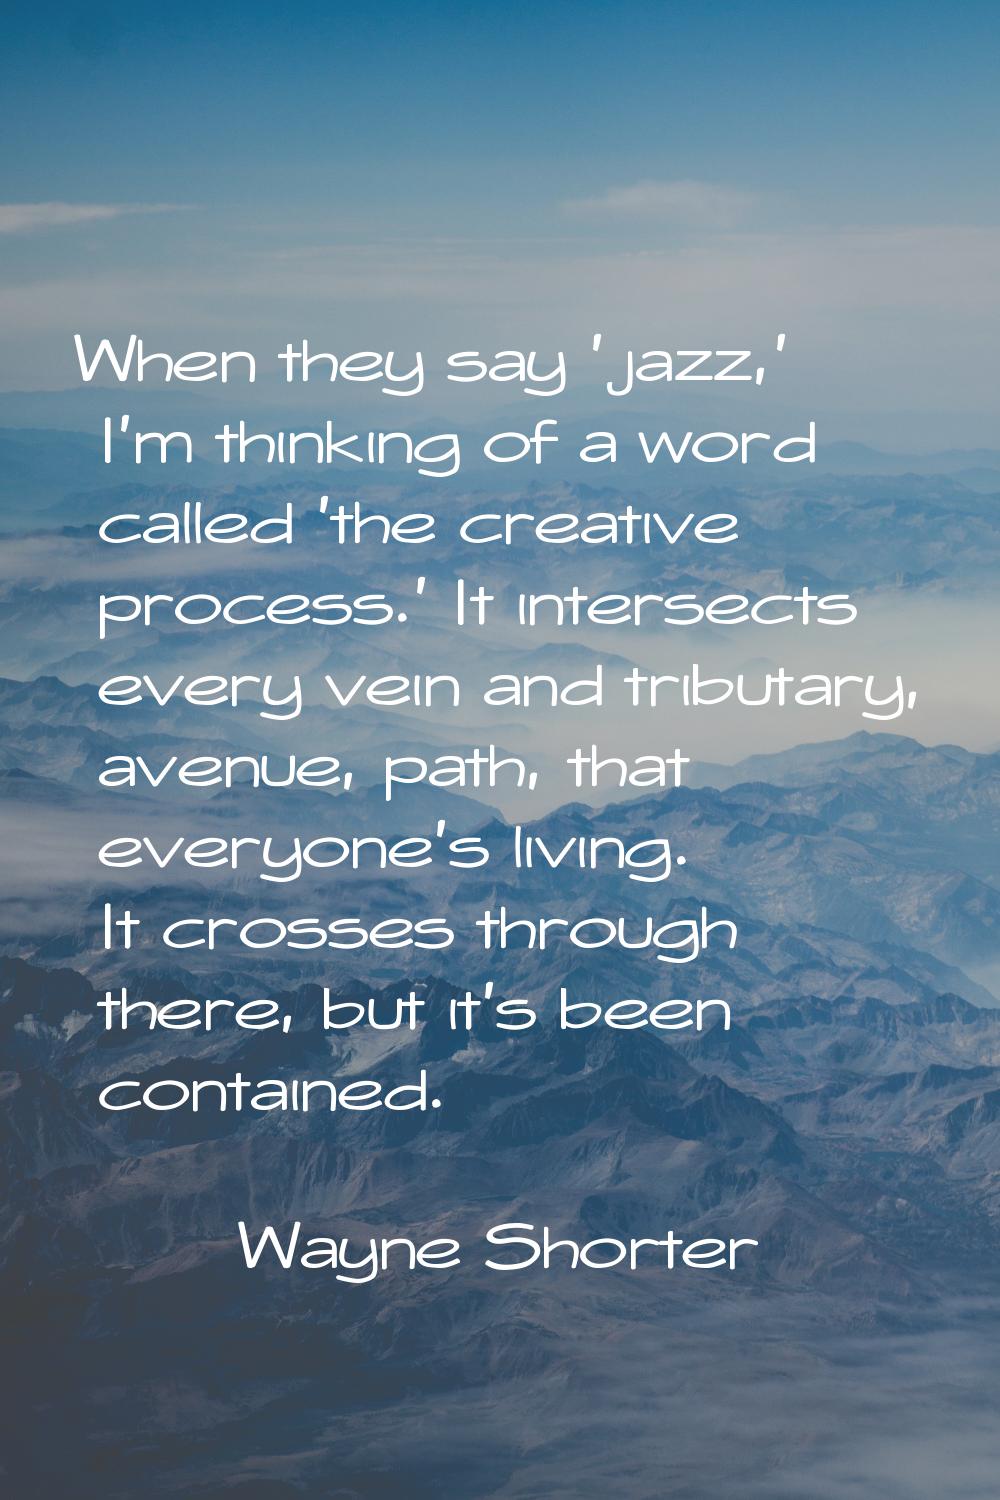 When they say 'jazz,' I'm thinking of a word called 'the creative process.' It intersects every vei